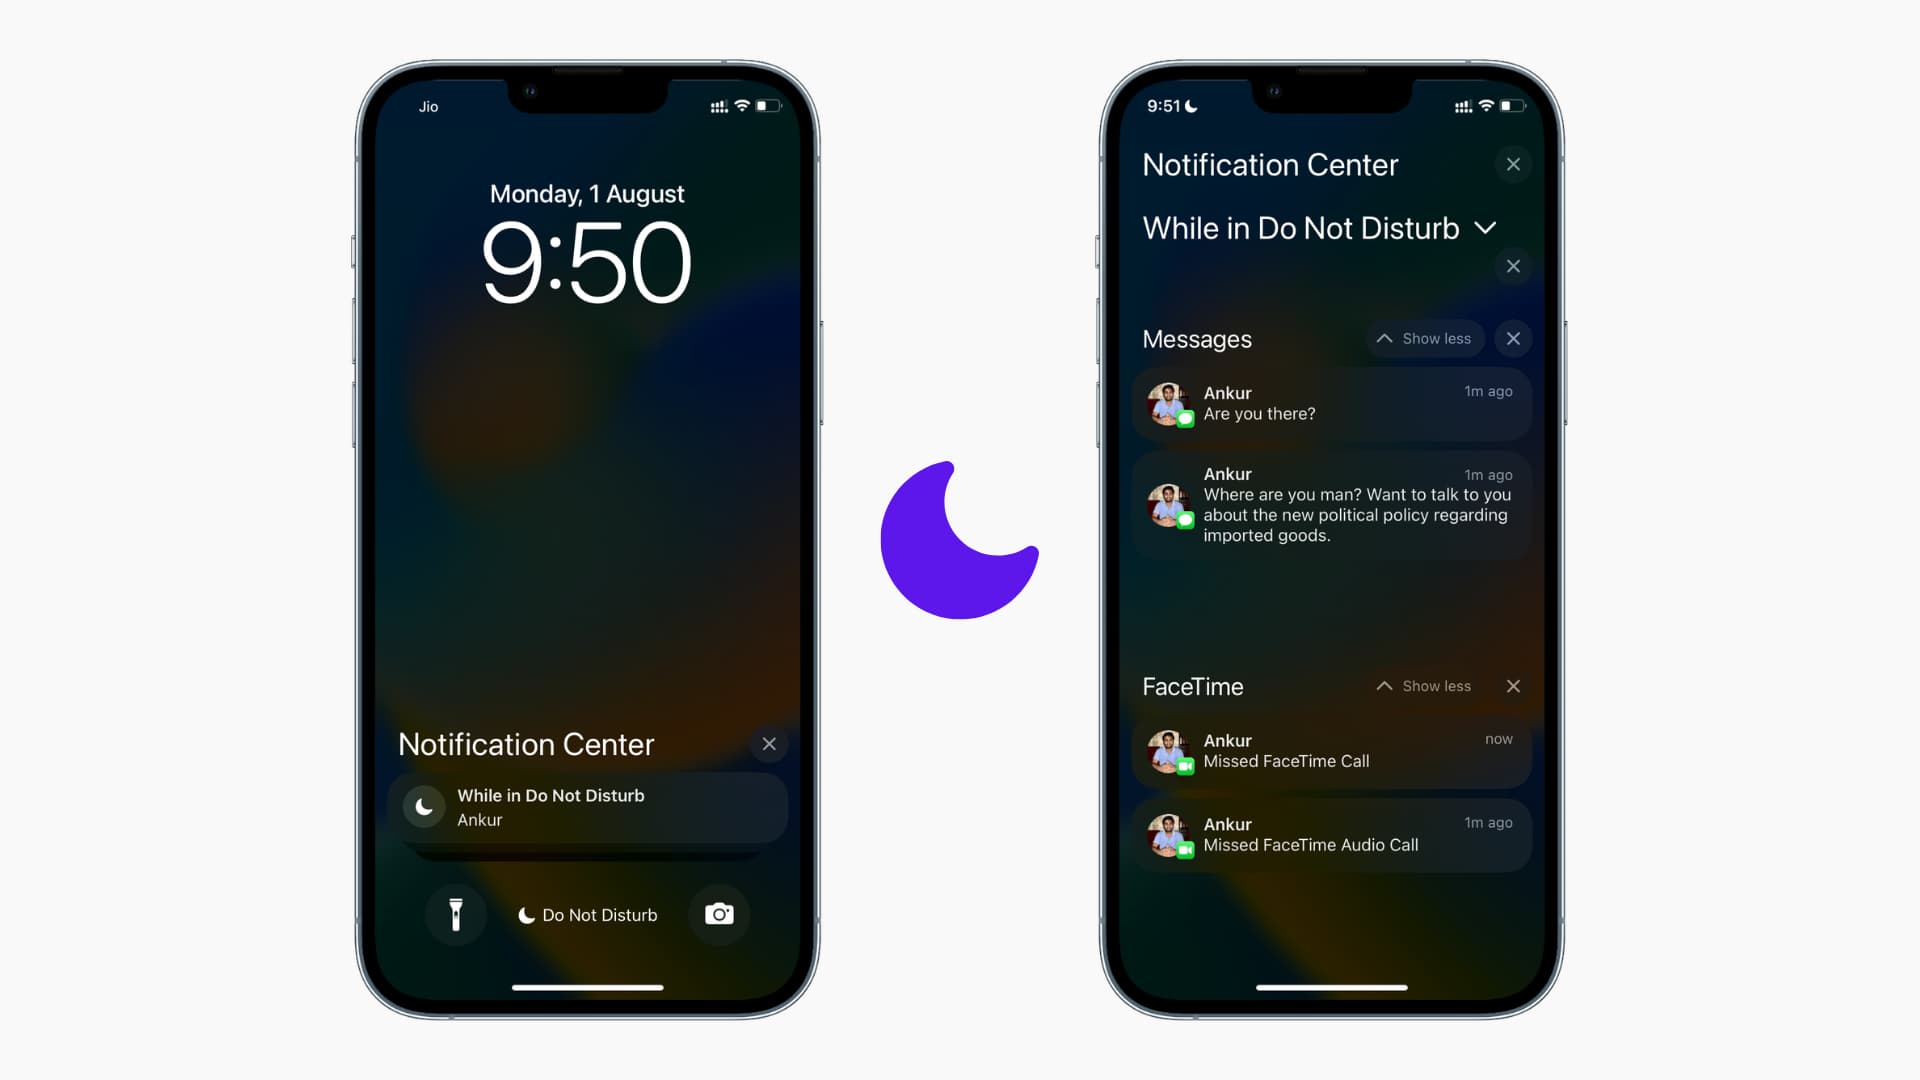 Notifications While in Do Not Disturb on iPhone